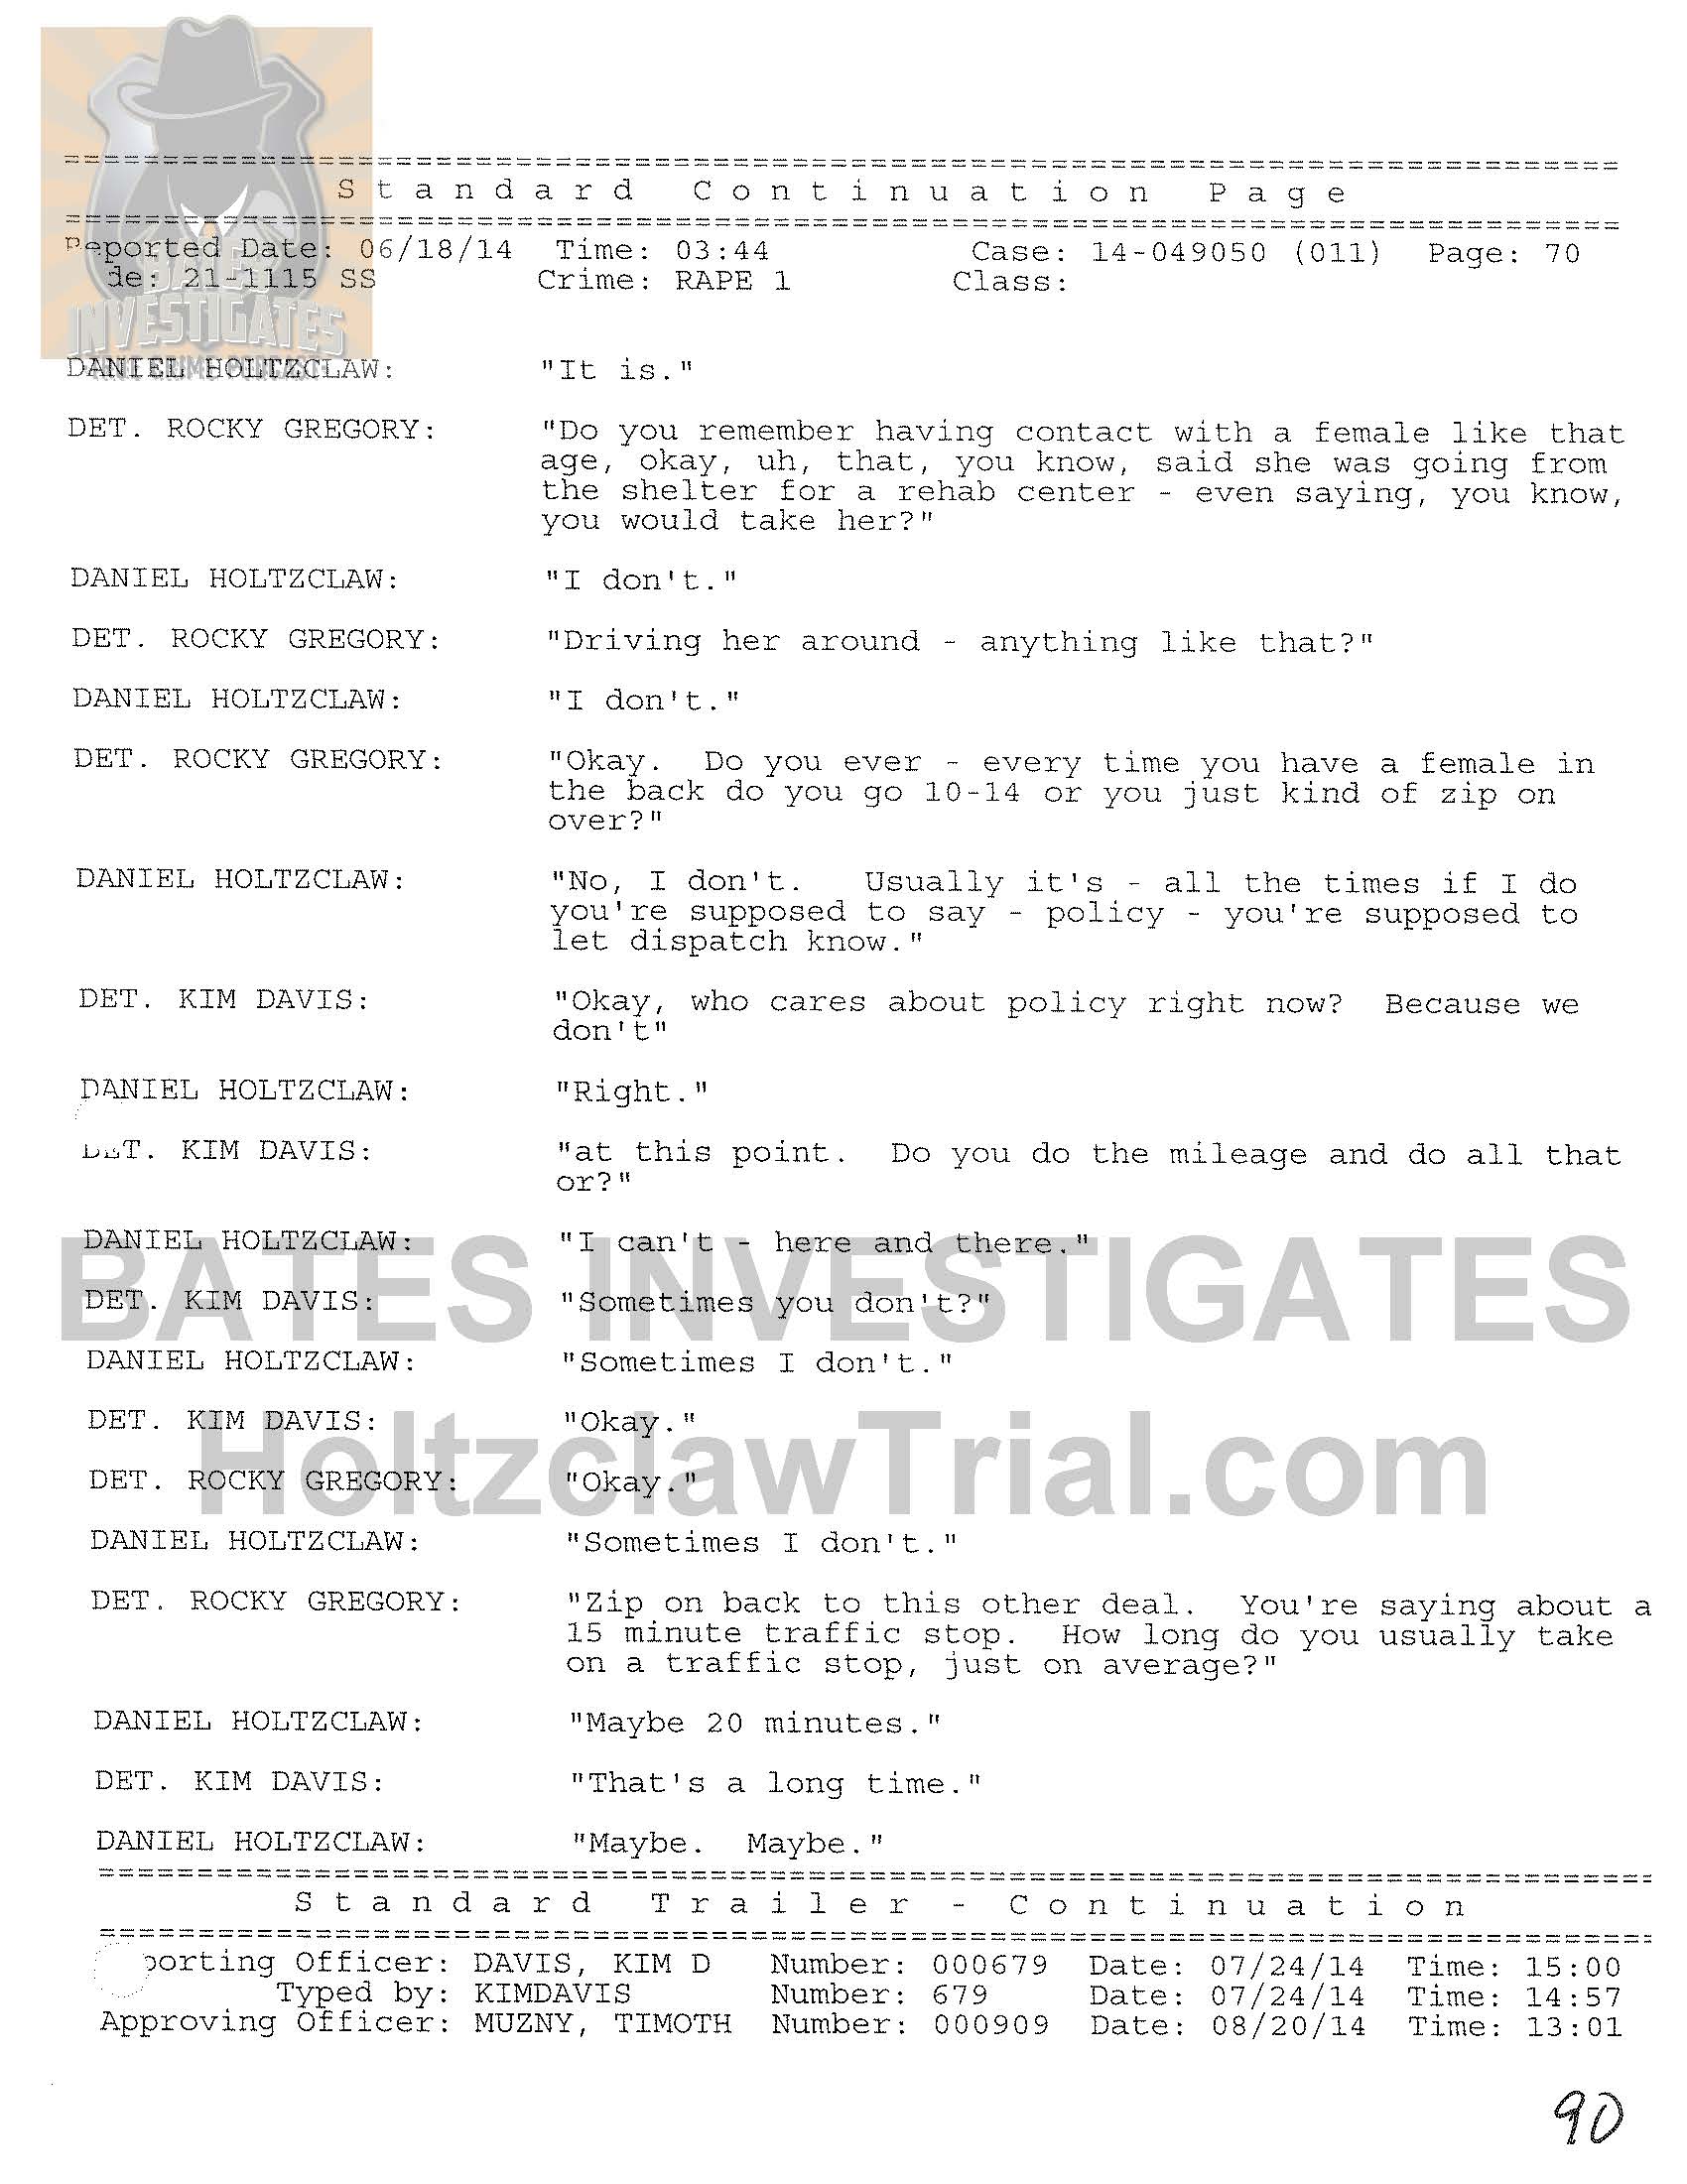 Holtzclaw Interrogation Transcript - Ep02 Redacted_Page_70.jpg